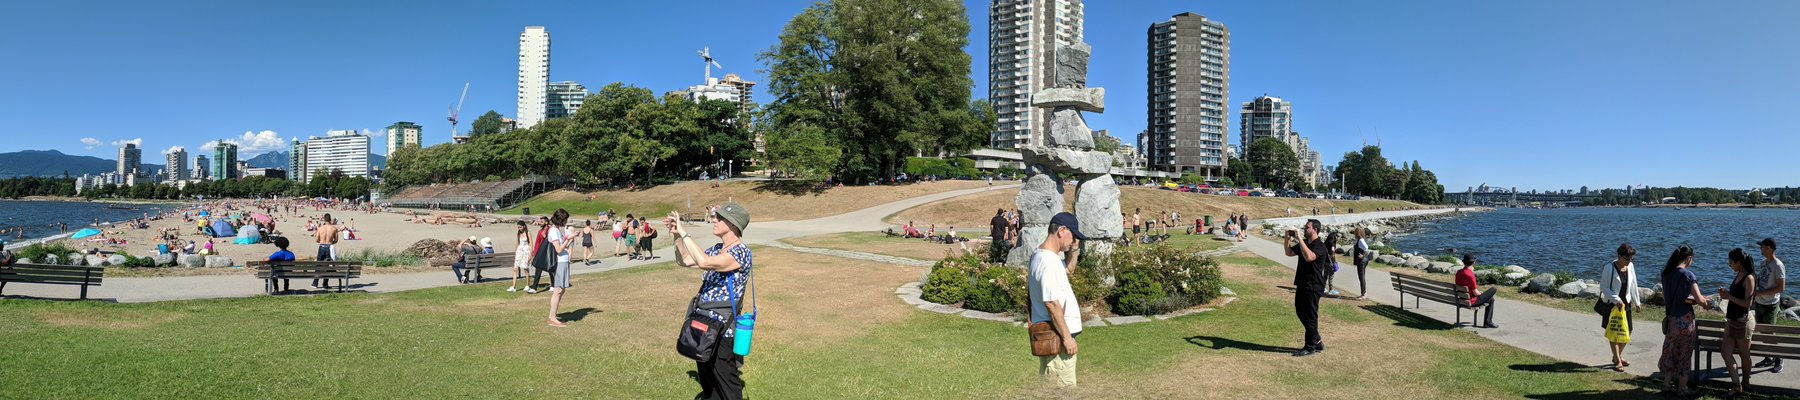 The Vancouver Seawall